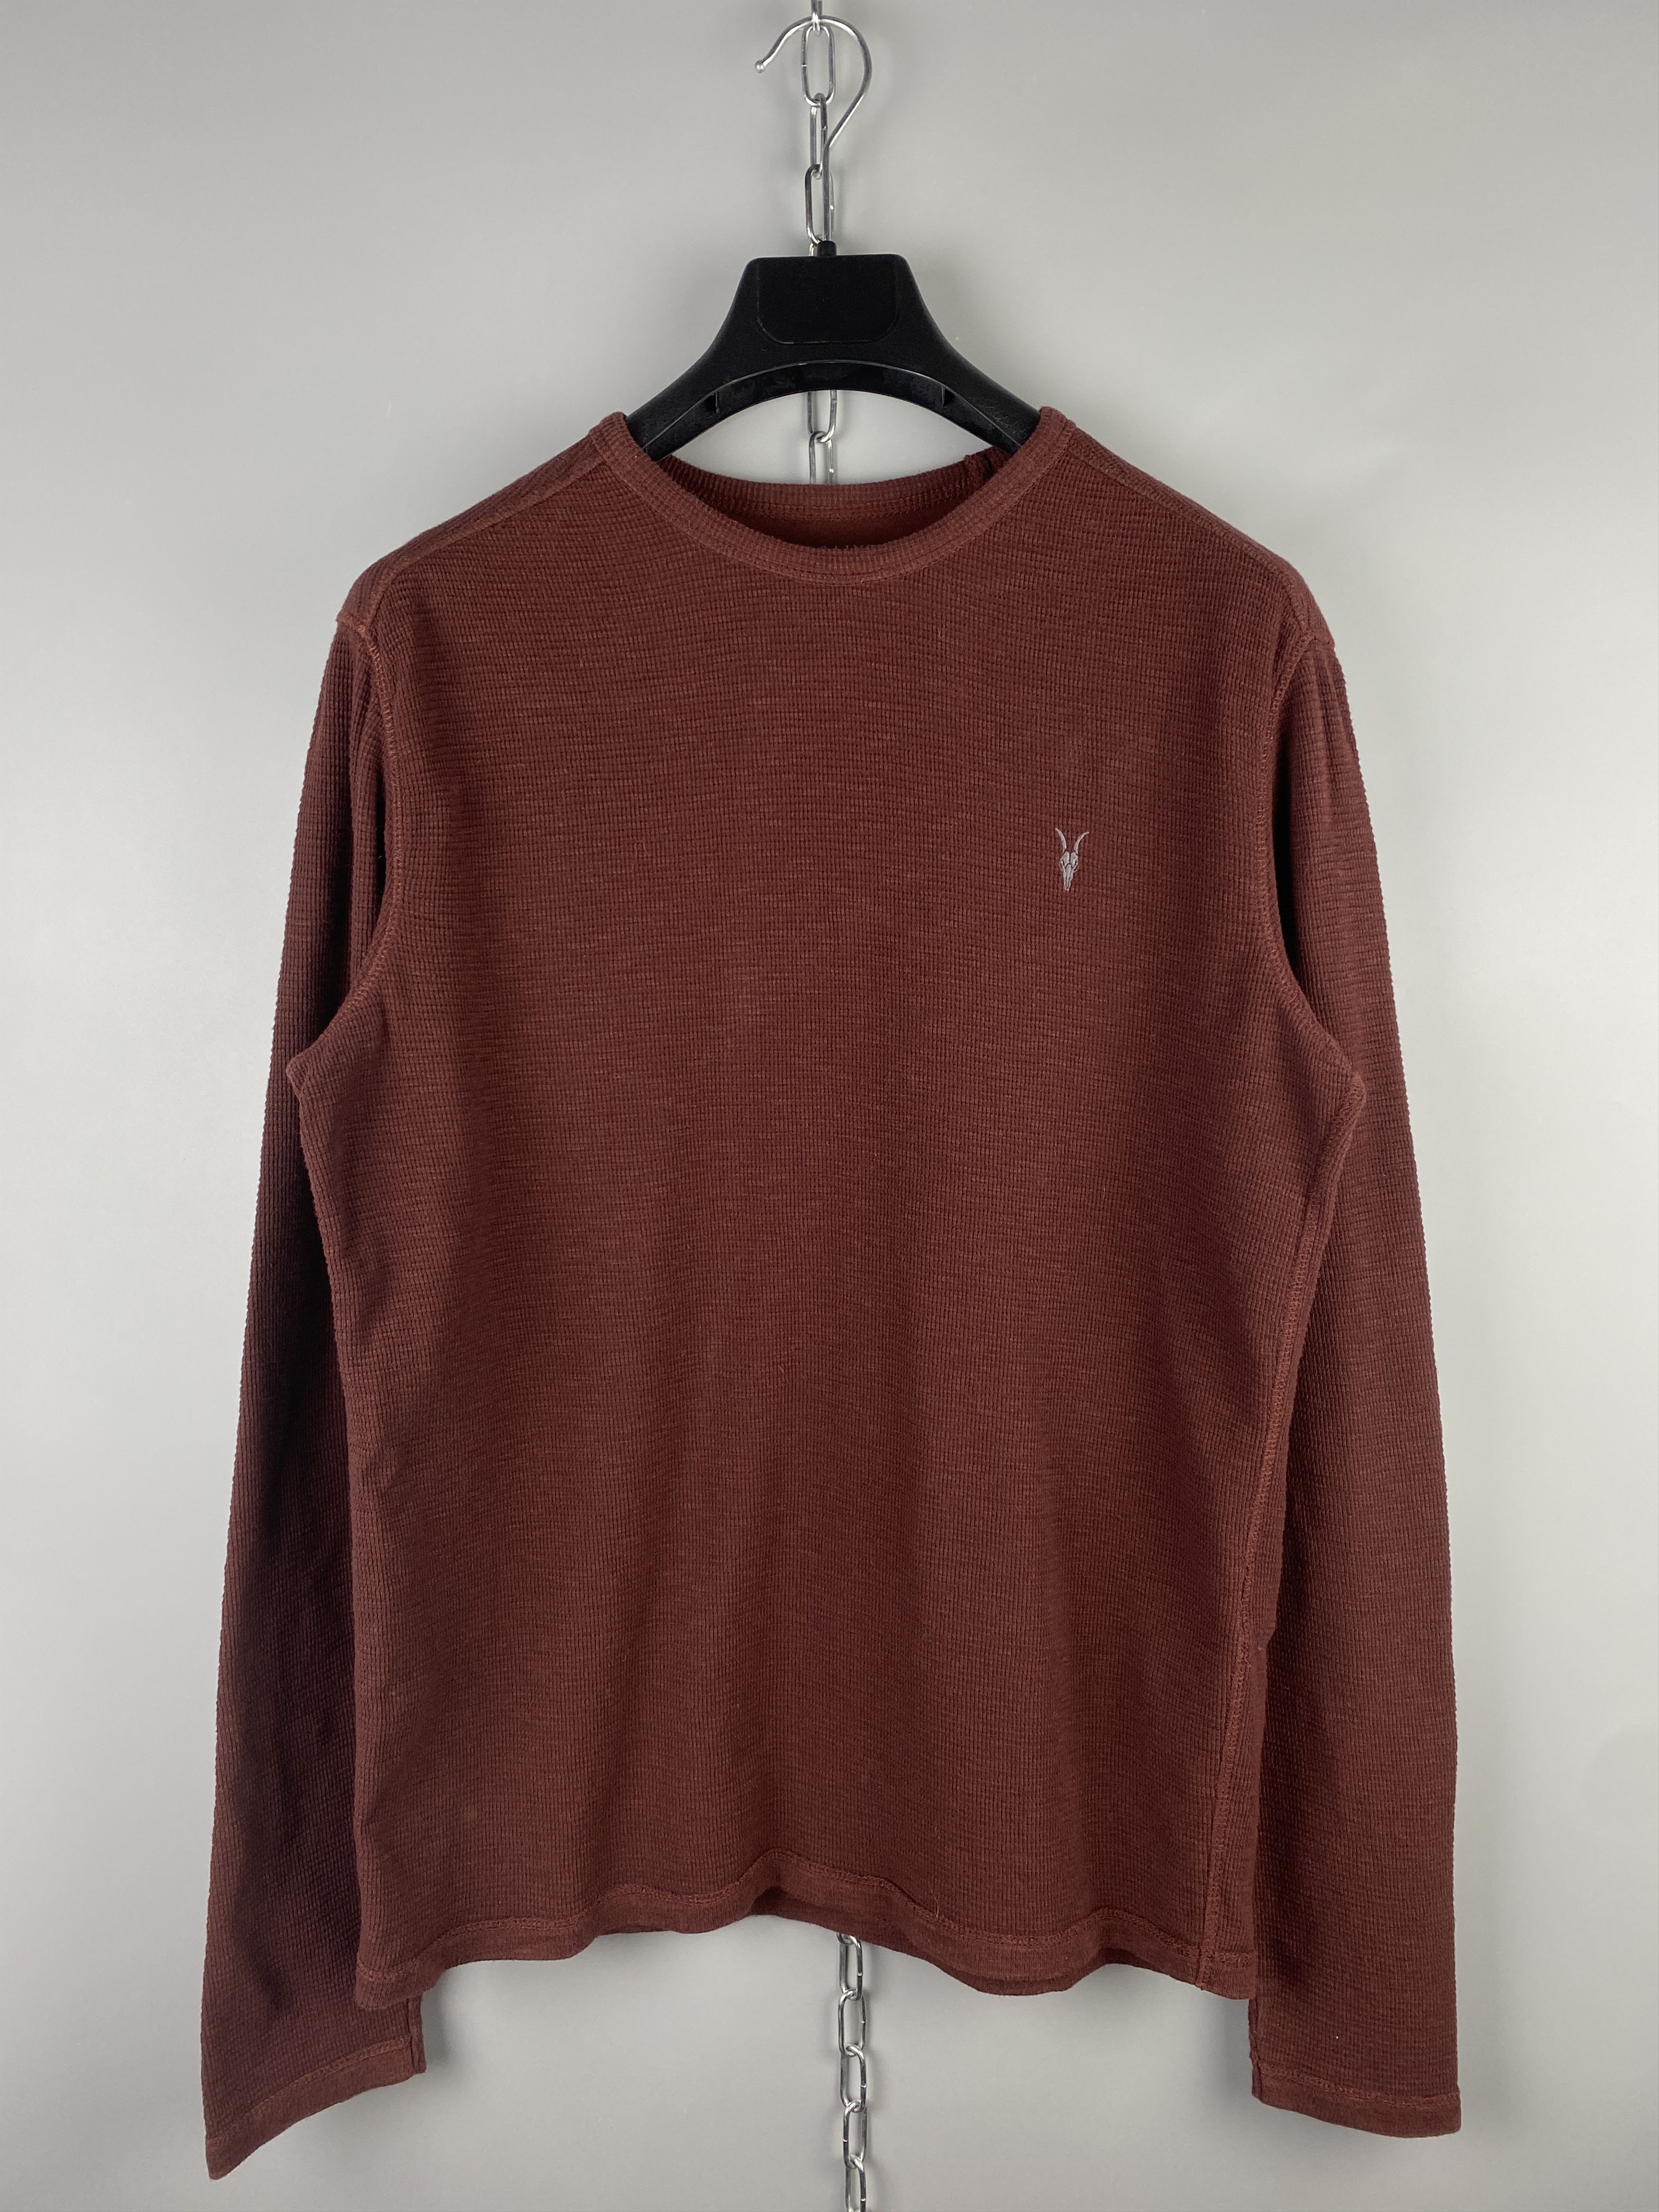 Pre-owned Allsaints All Saints Clash Long Sleeve Crew Jumper Top In Burgundy